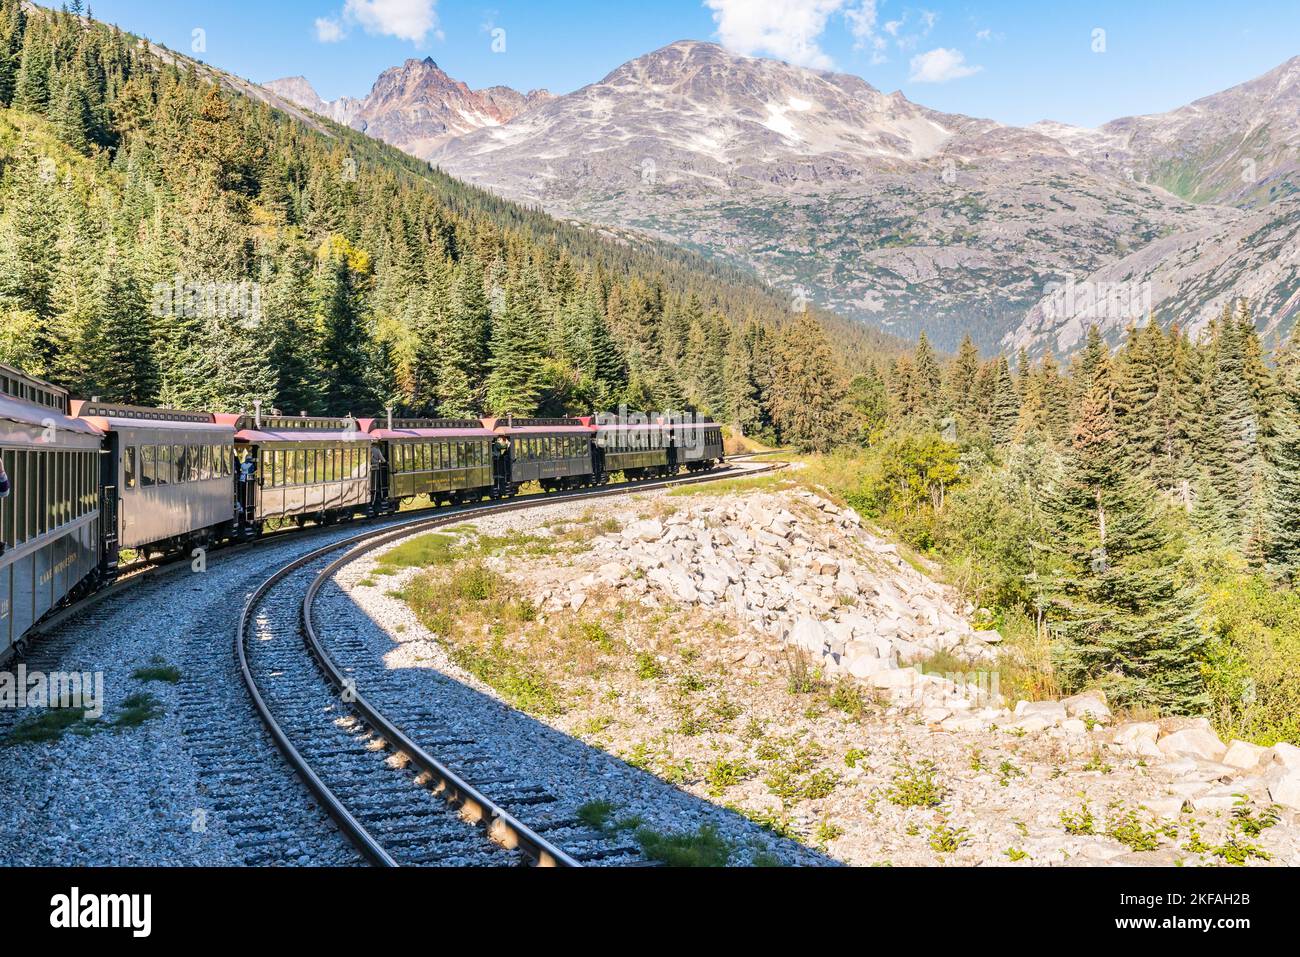 Skagway, AK - September 7, 2022: The White Pass and Yukon Route train winds it's way through the mountains east of Skagway. Stock Photo